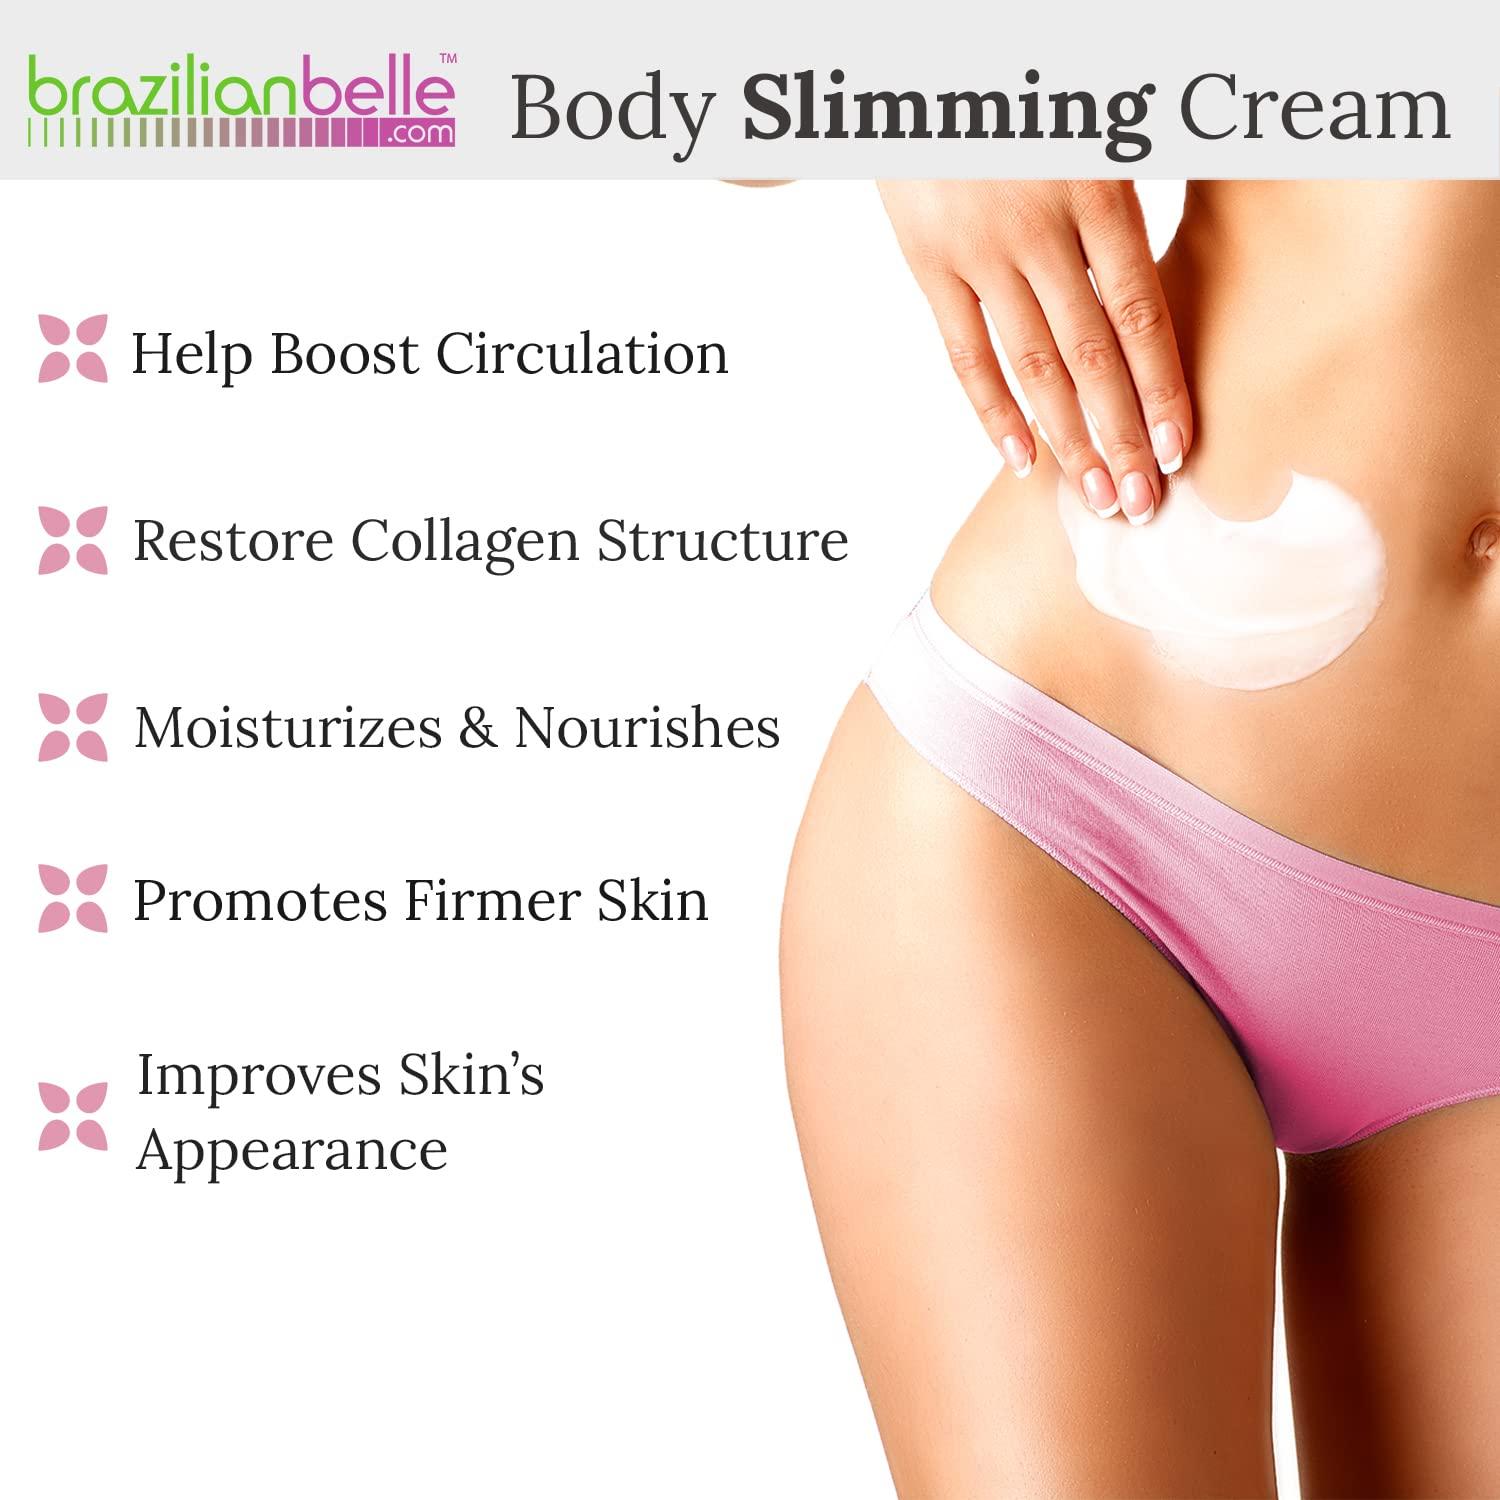 Skin Firming and Toning Cream with Premium Caffeine Extract, Cellulite  Removal Treatment, Helps Tone, Firm, and Rejuvenate Your Body